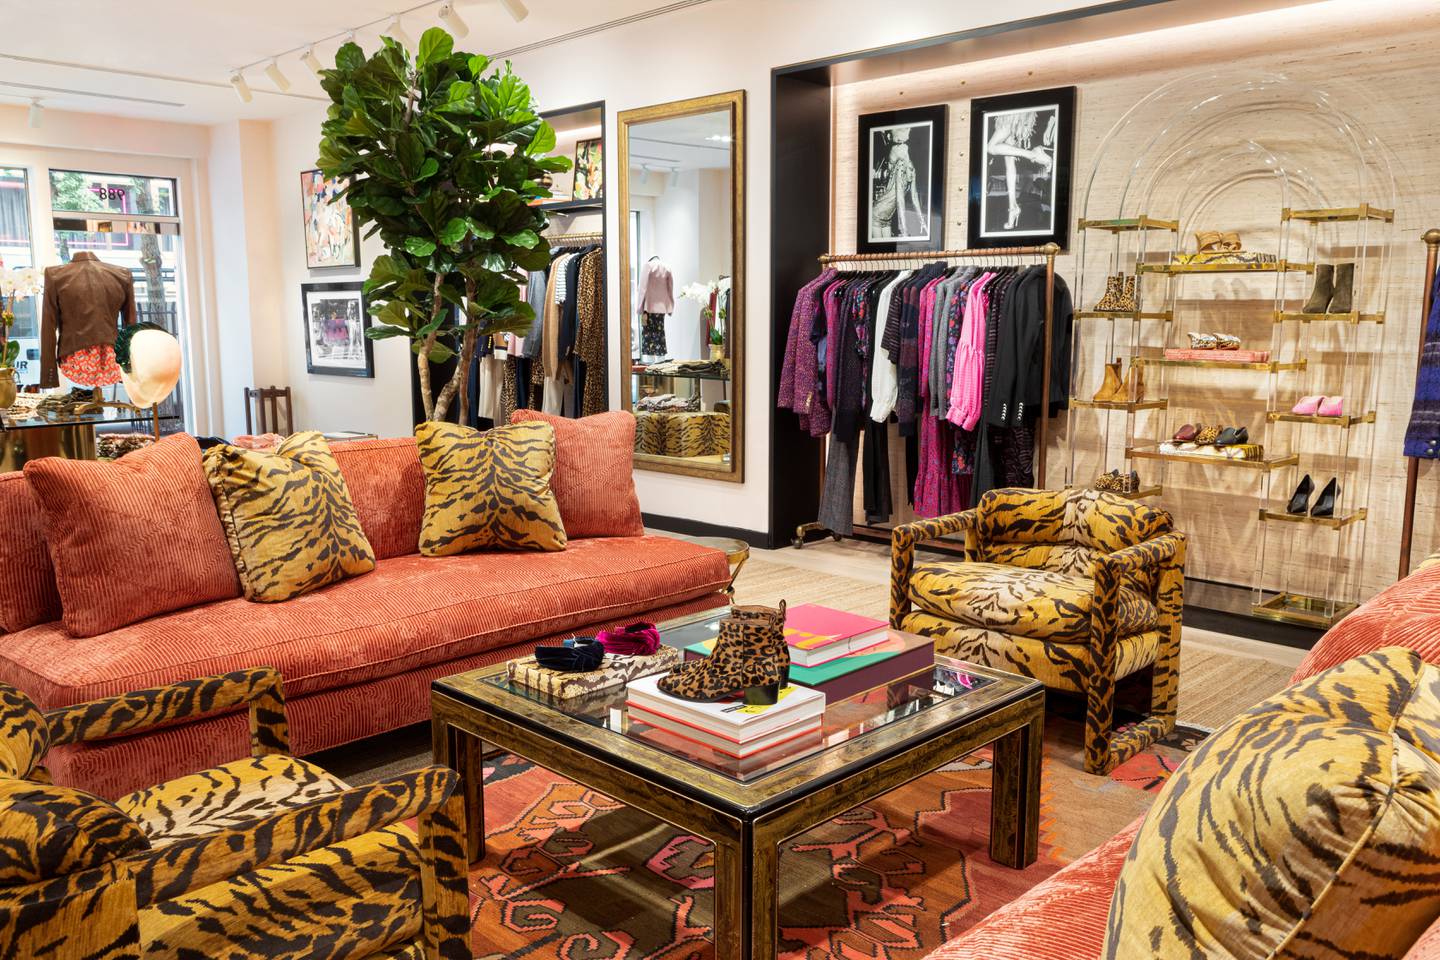 The fashion brand Veronica Beard uses maximalism in its retail design to differentiate itself.